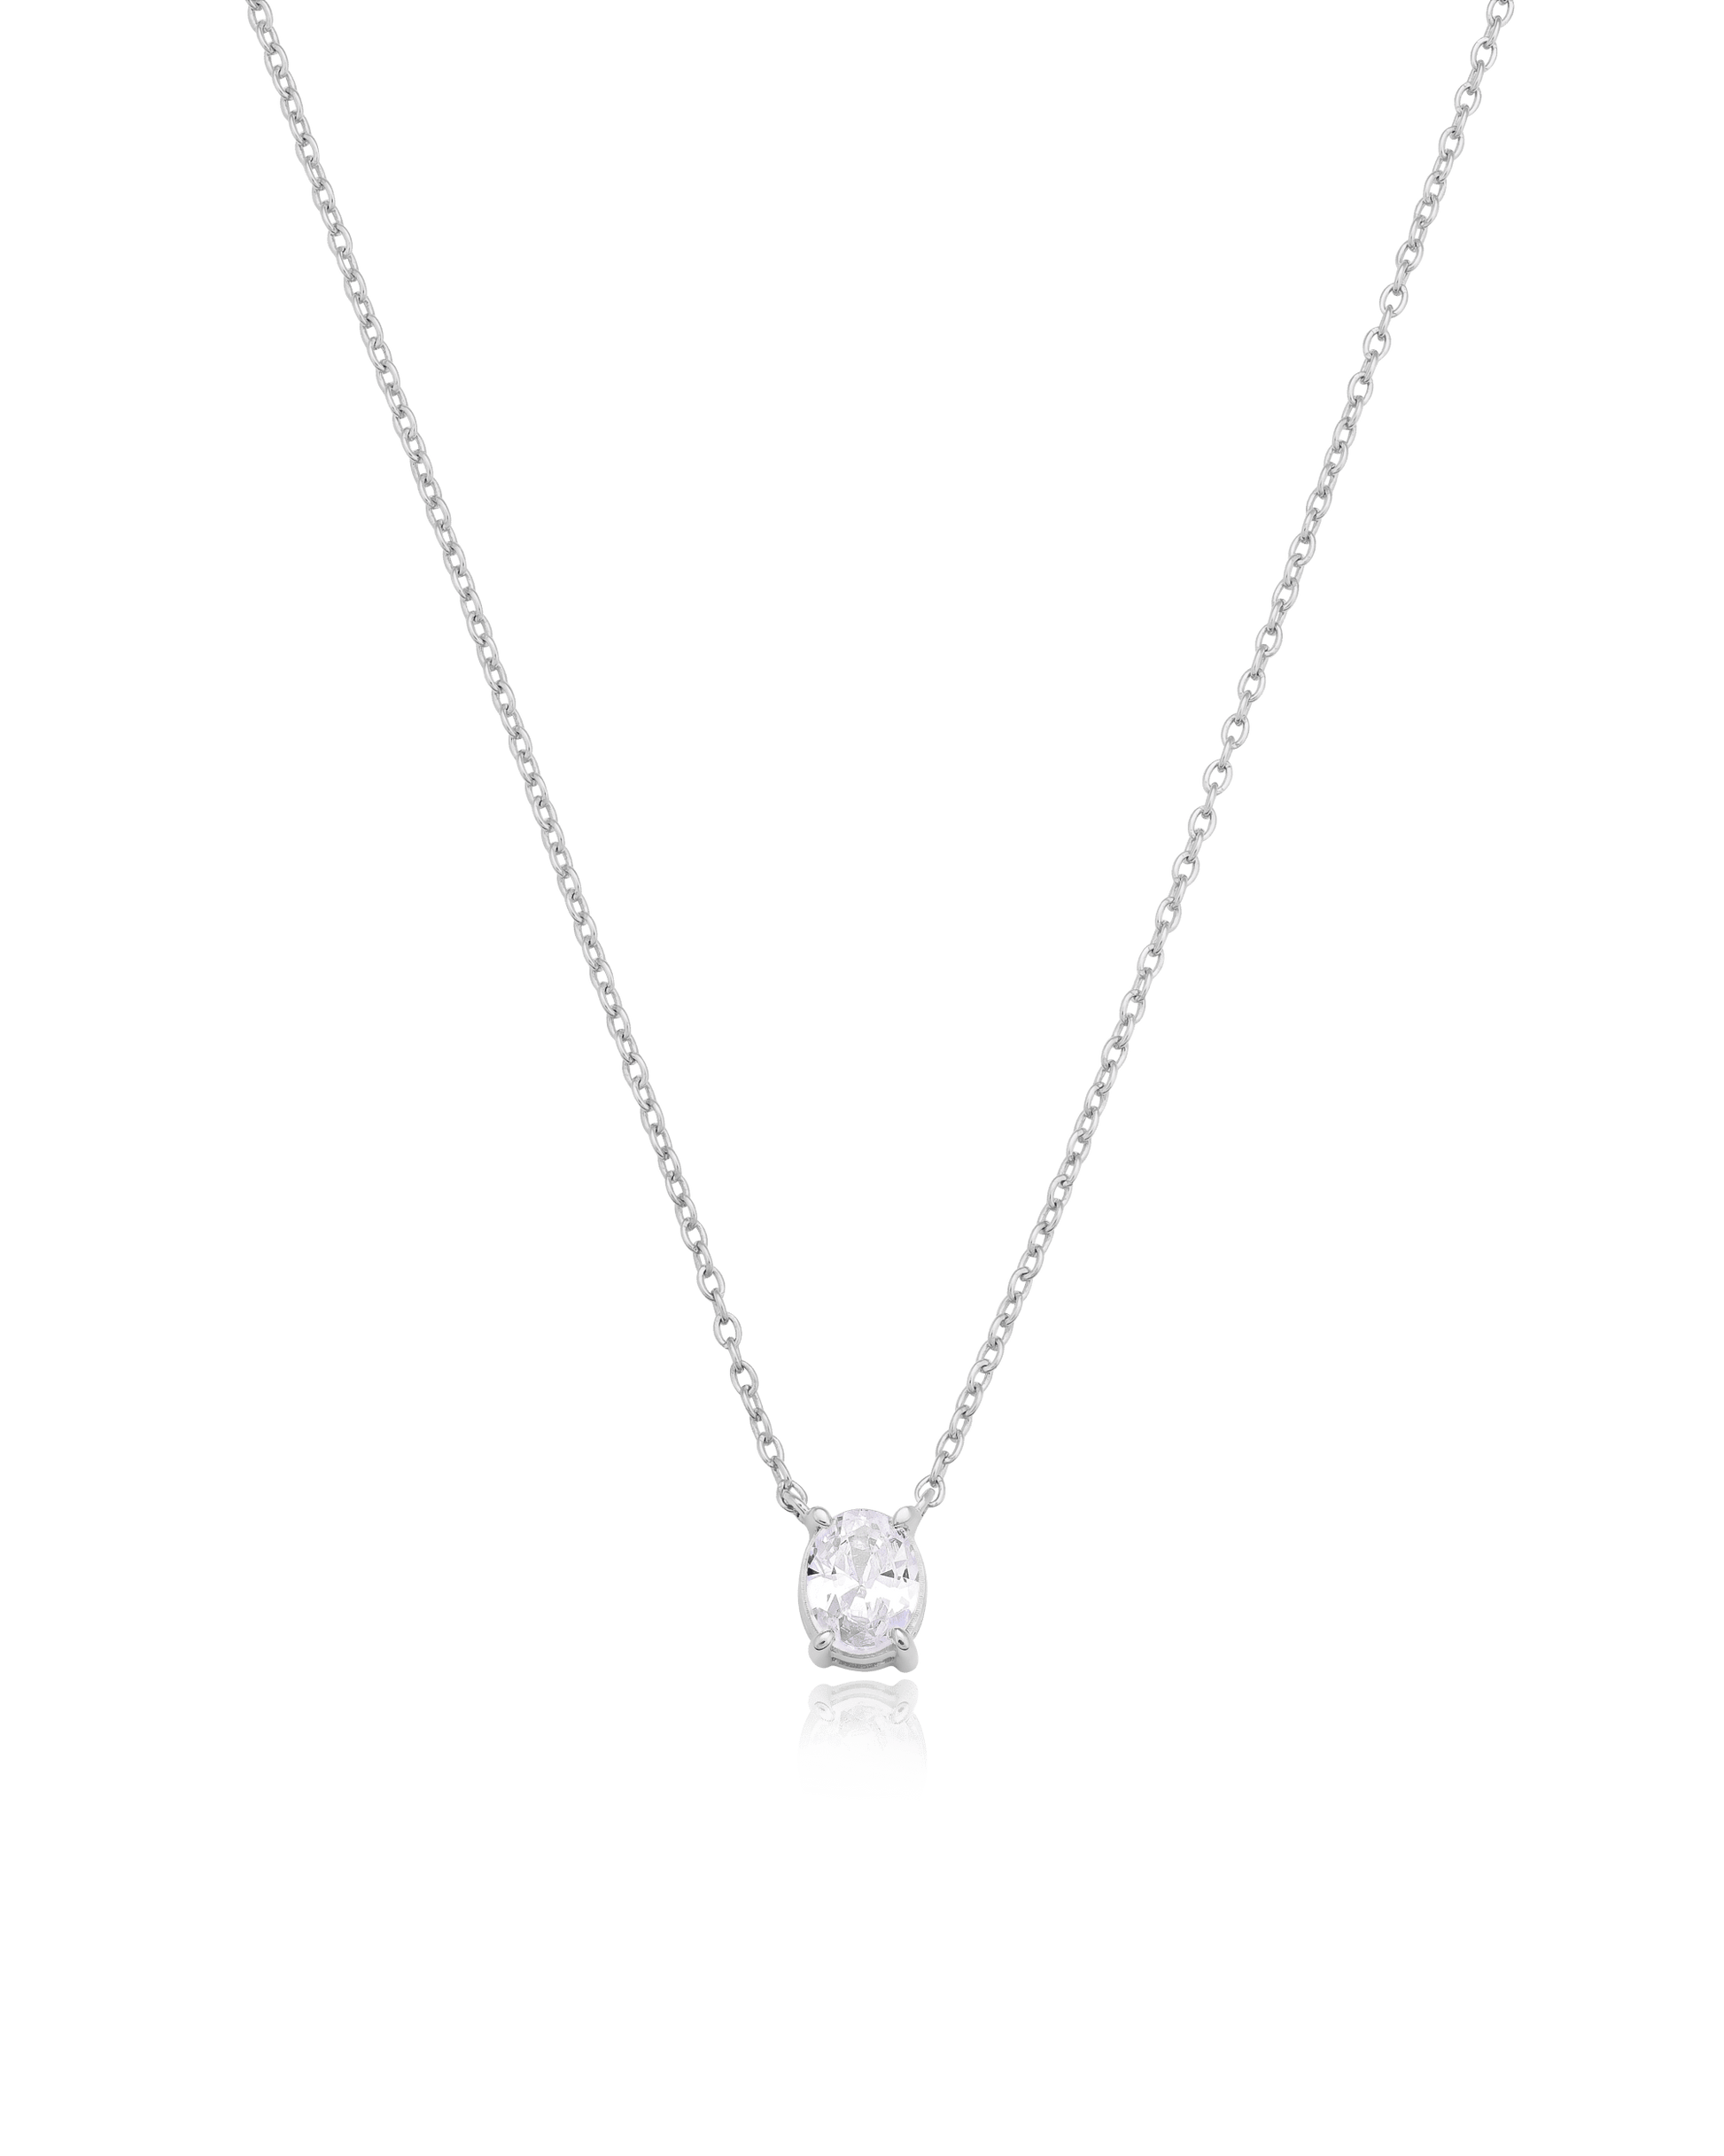 Oval Solitaire Diamond Necklace - 925 Sterling Silver Necklaces magal-dev 0.10 CT 16” 